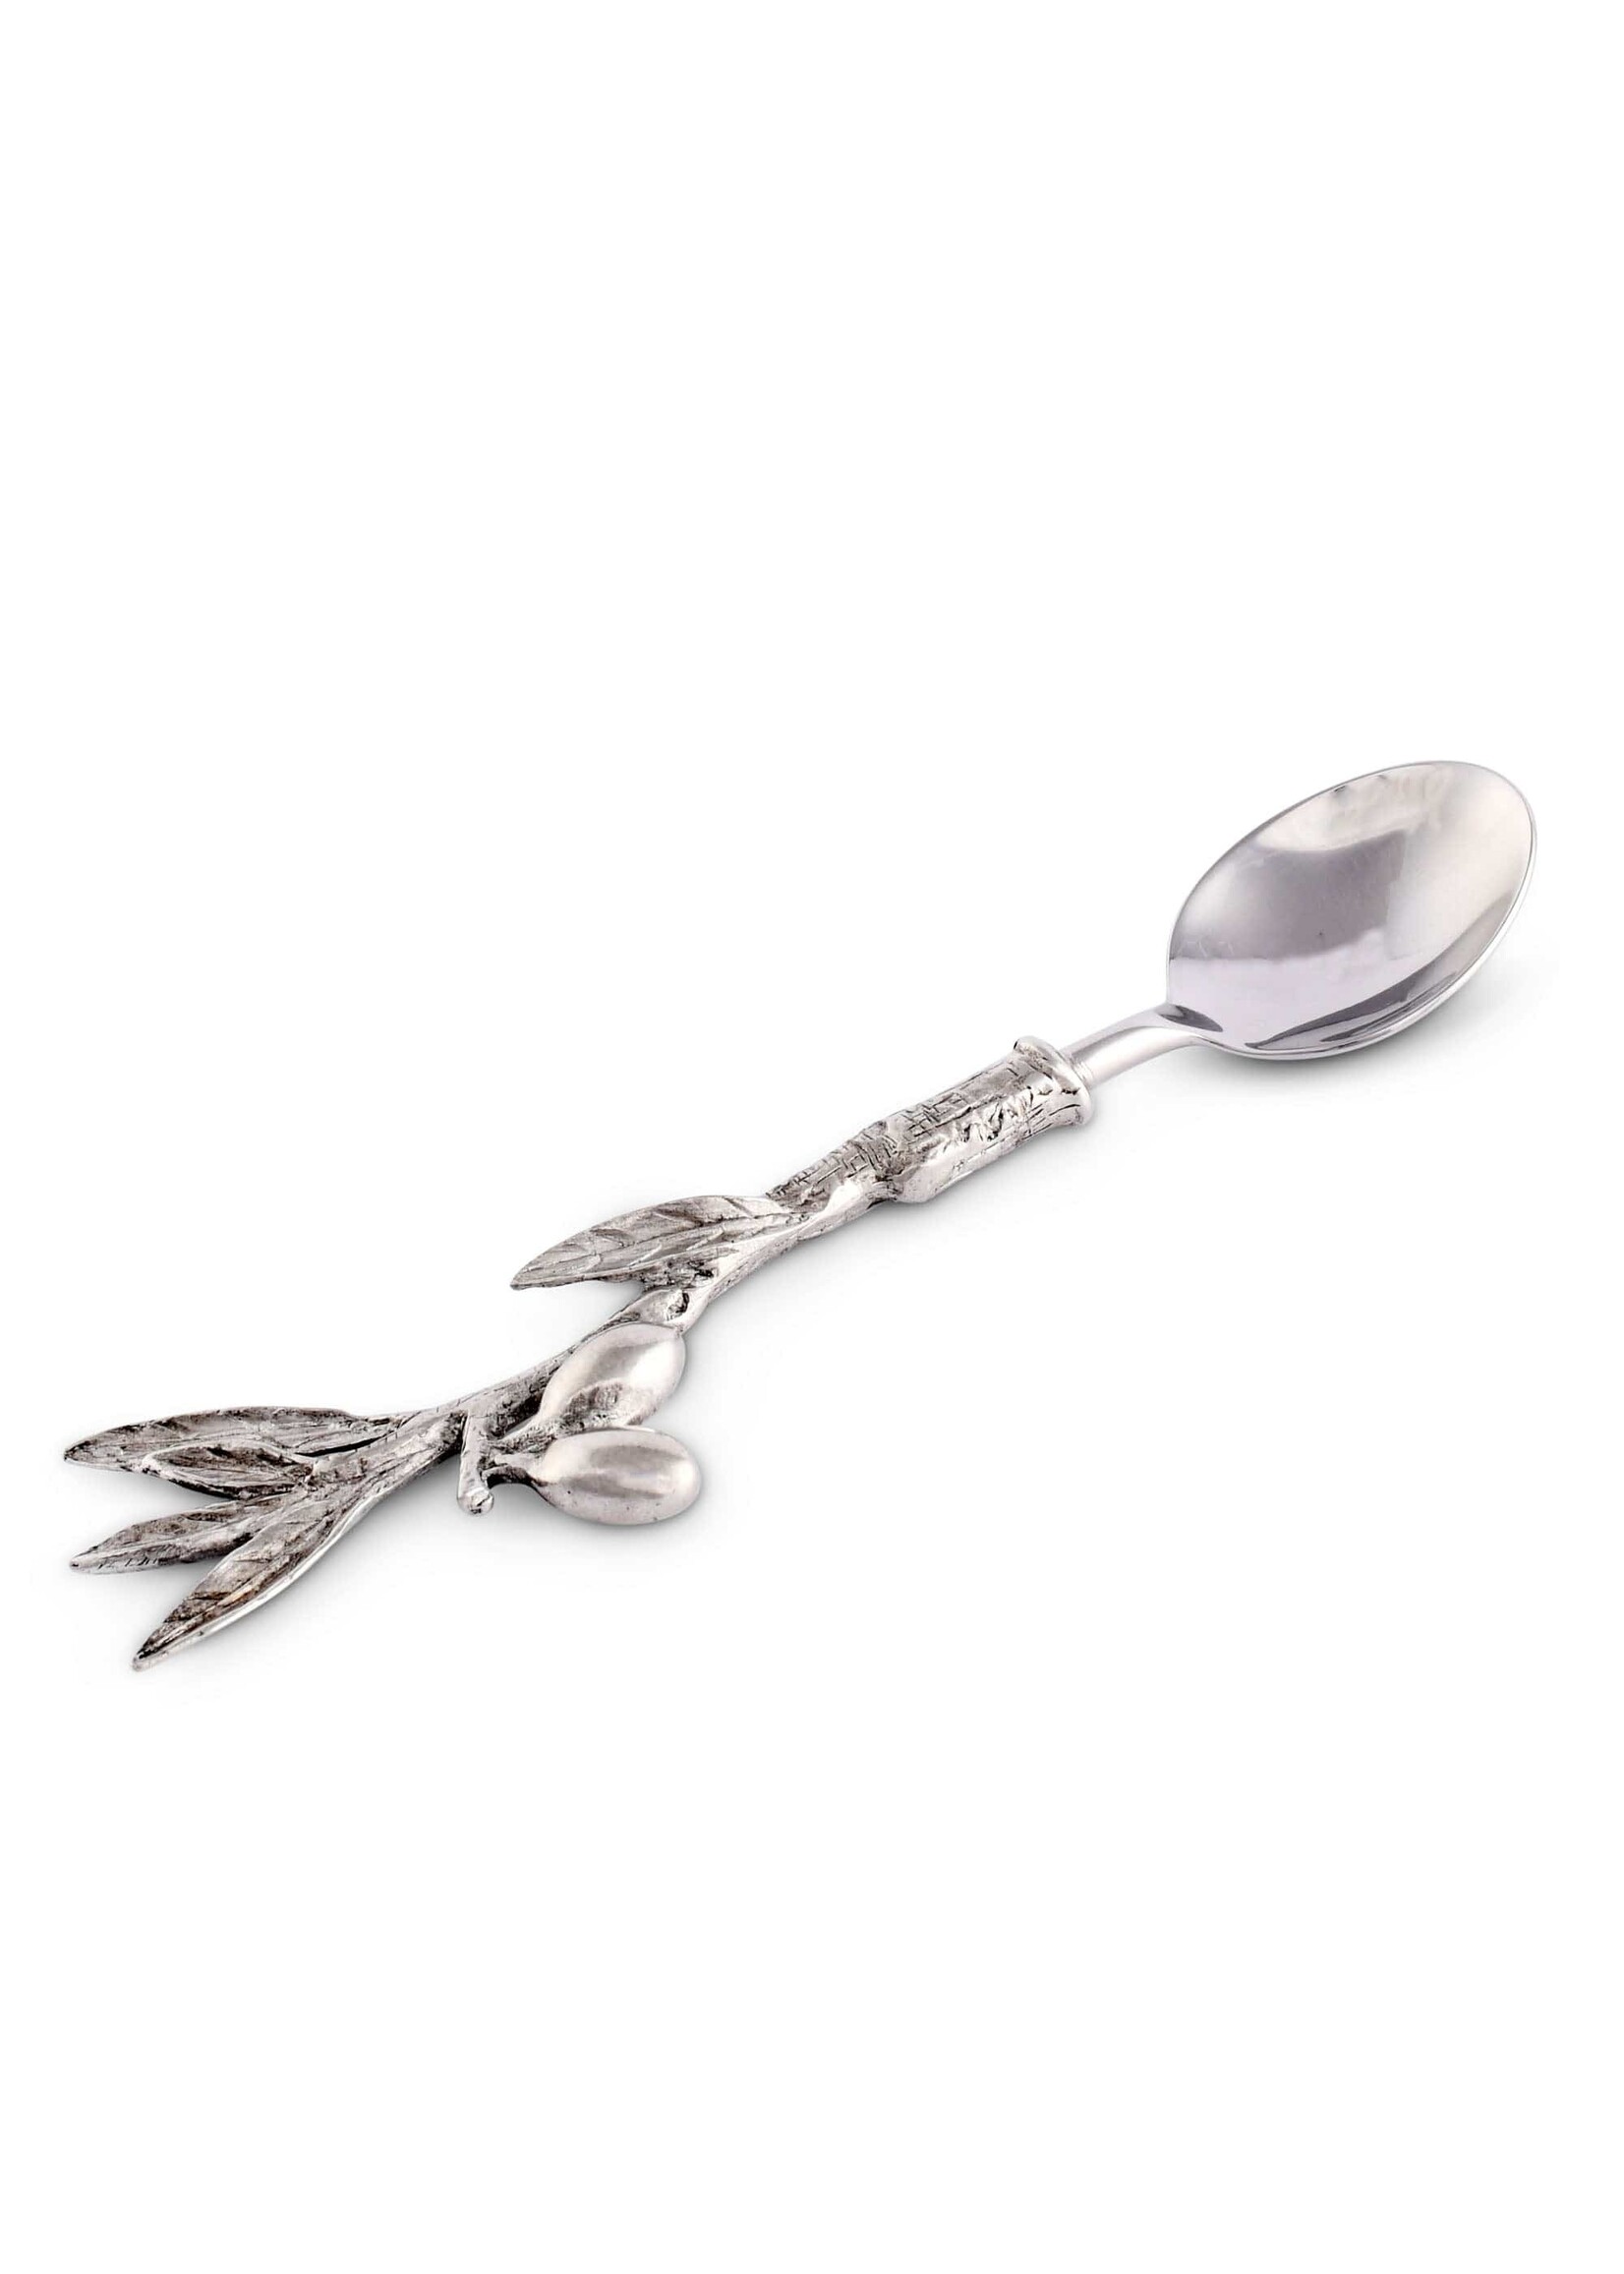 Hors d'oeuvre Spoon - Olive